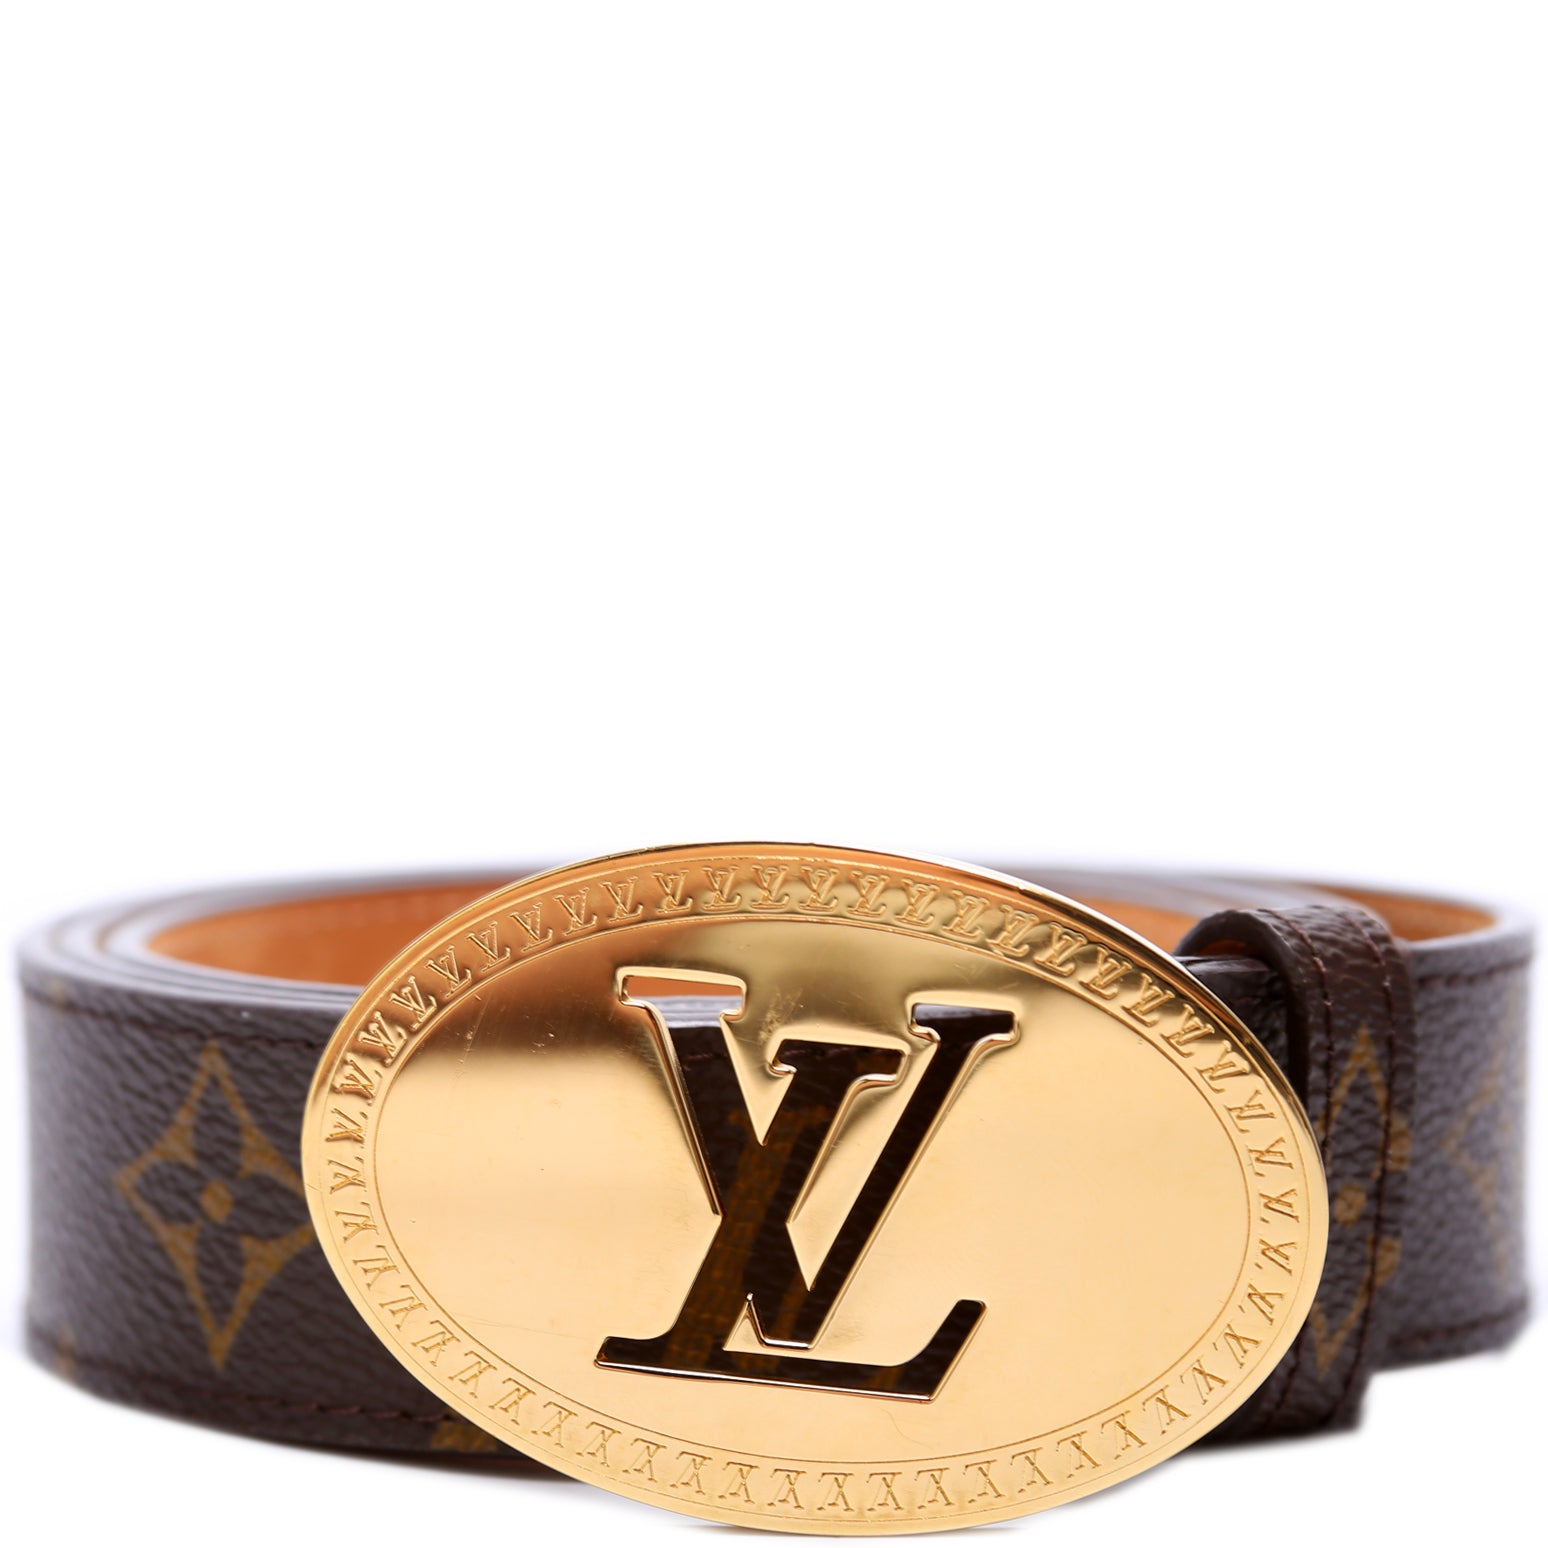 LV Cut Out Oval Buckle Belt Size 90/36